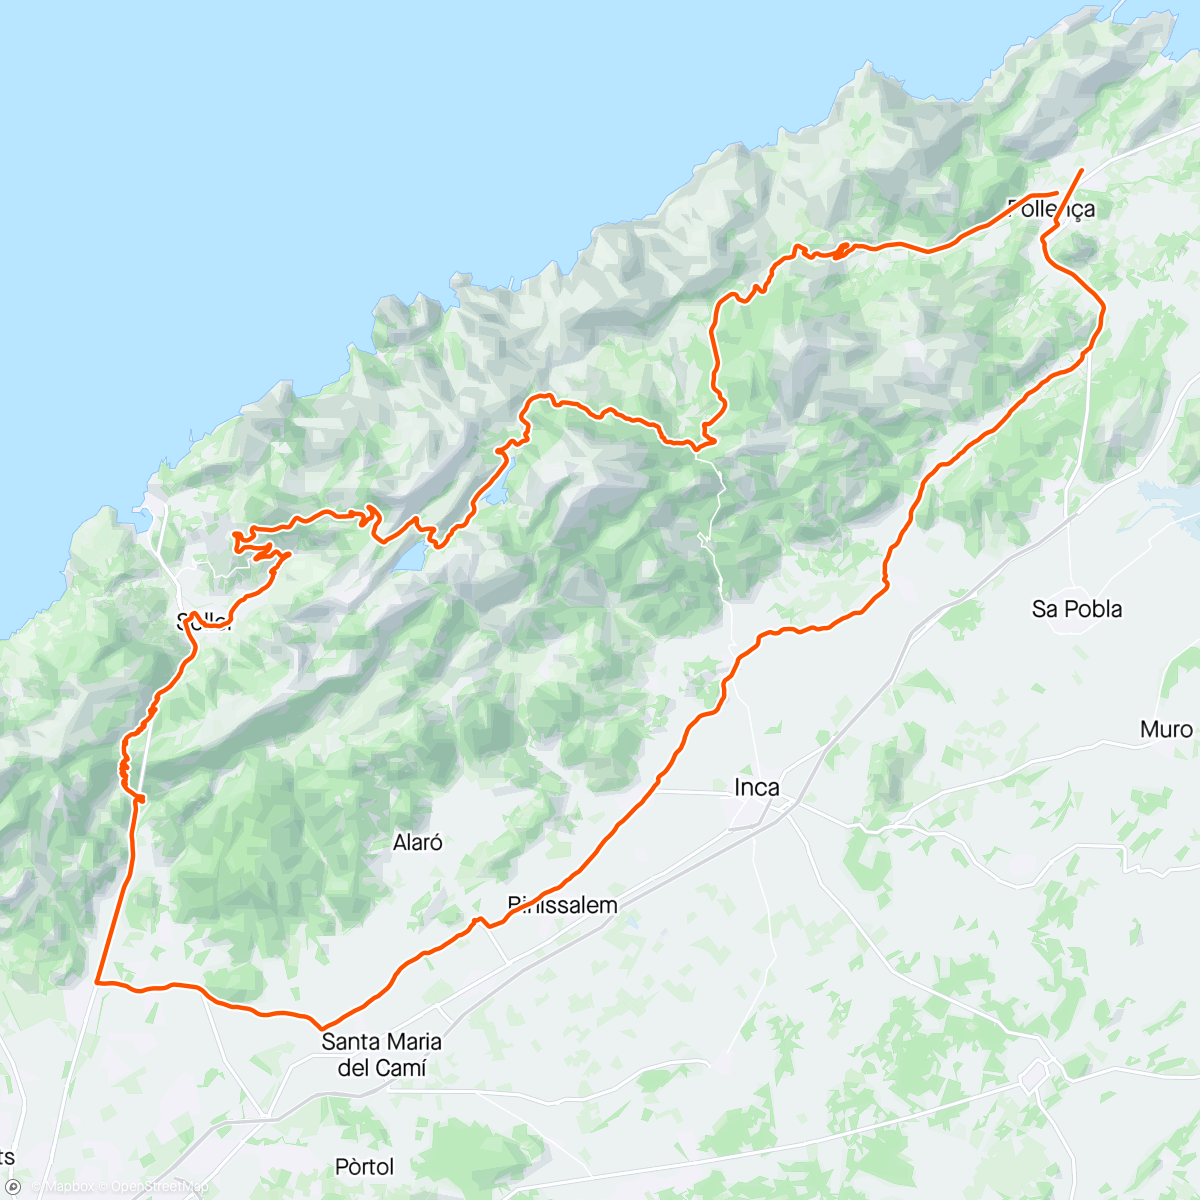 Map of the activity, Majorca Day 2: Exhausting ride to Furnalutz via Col de Femina and Tunnel de Munaber. Back via Col de Soller. Chickened out of doing Orient and Honneur.